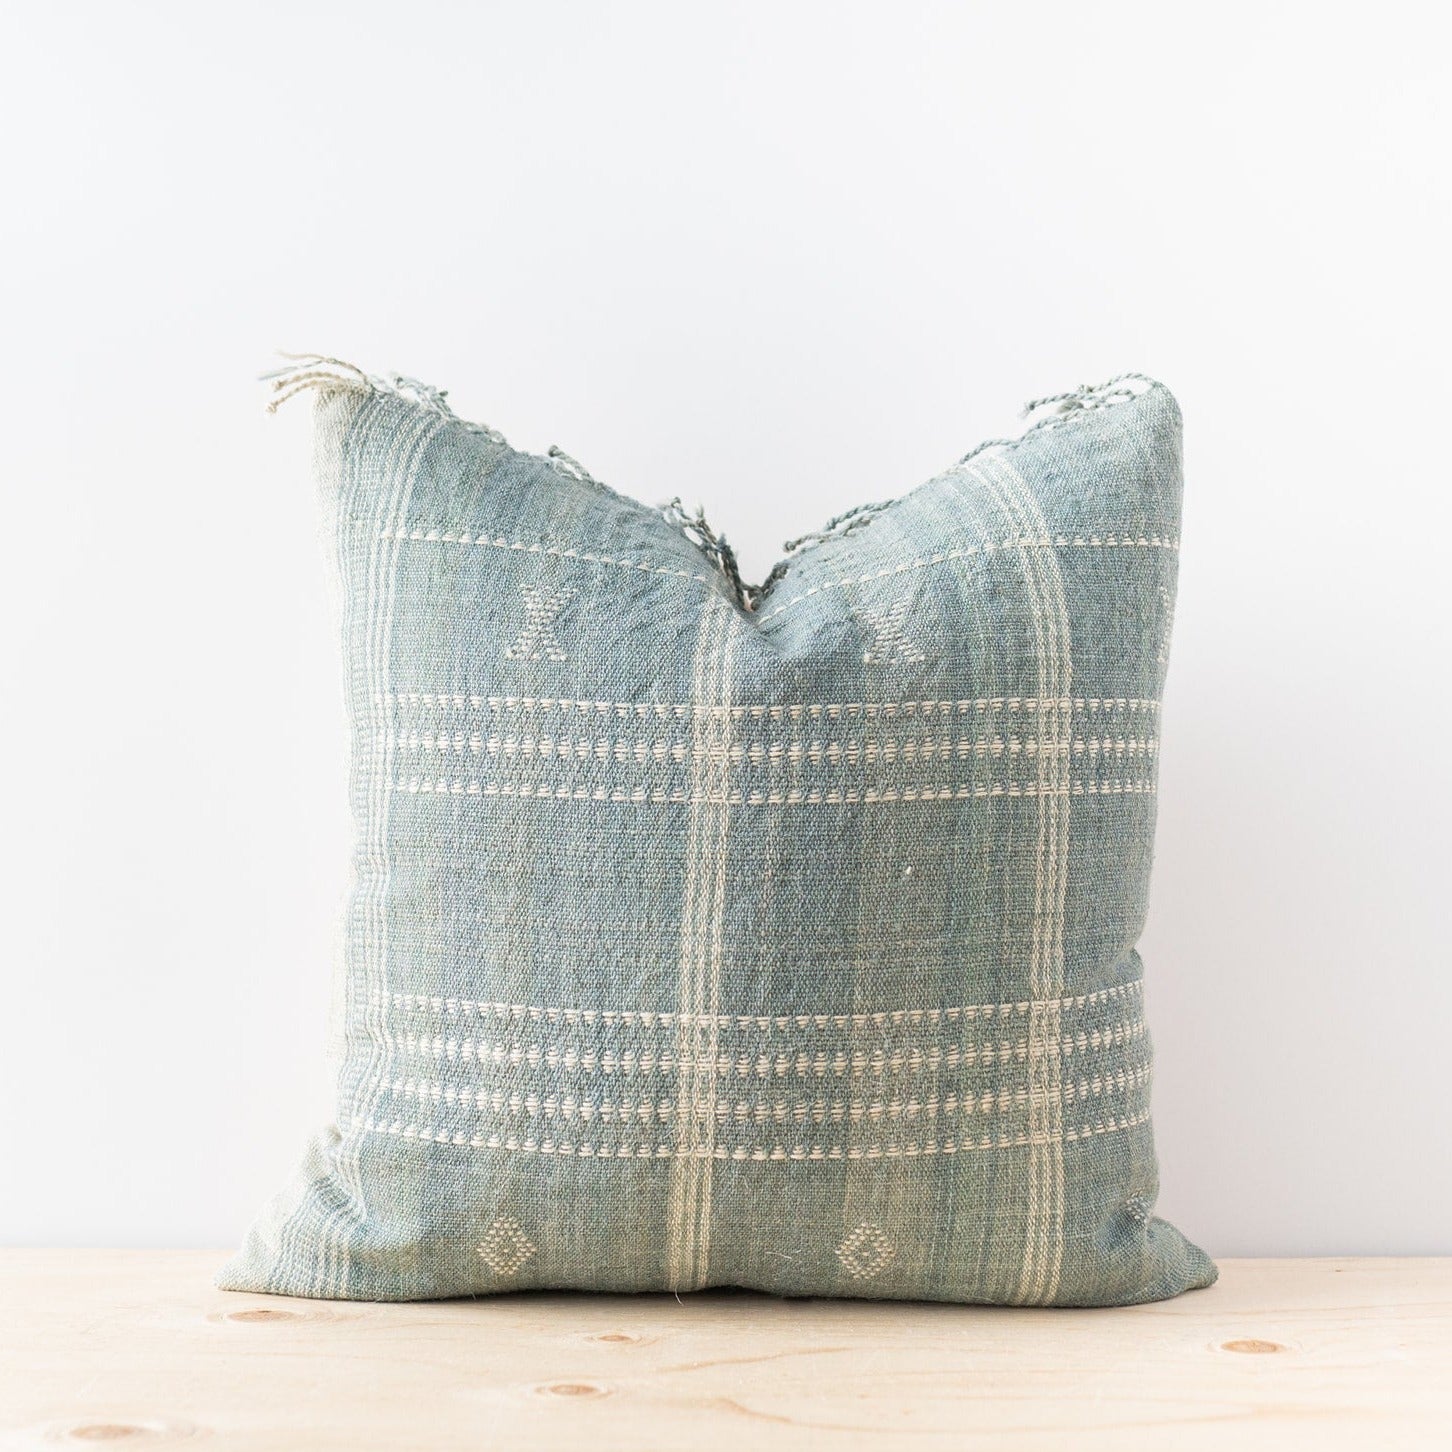 Square sage bhujodi pillow cover with fringe along top